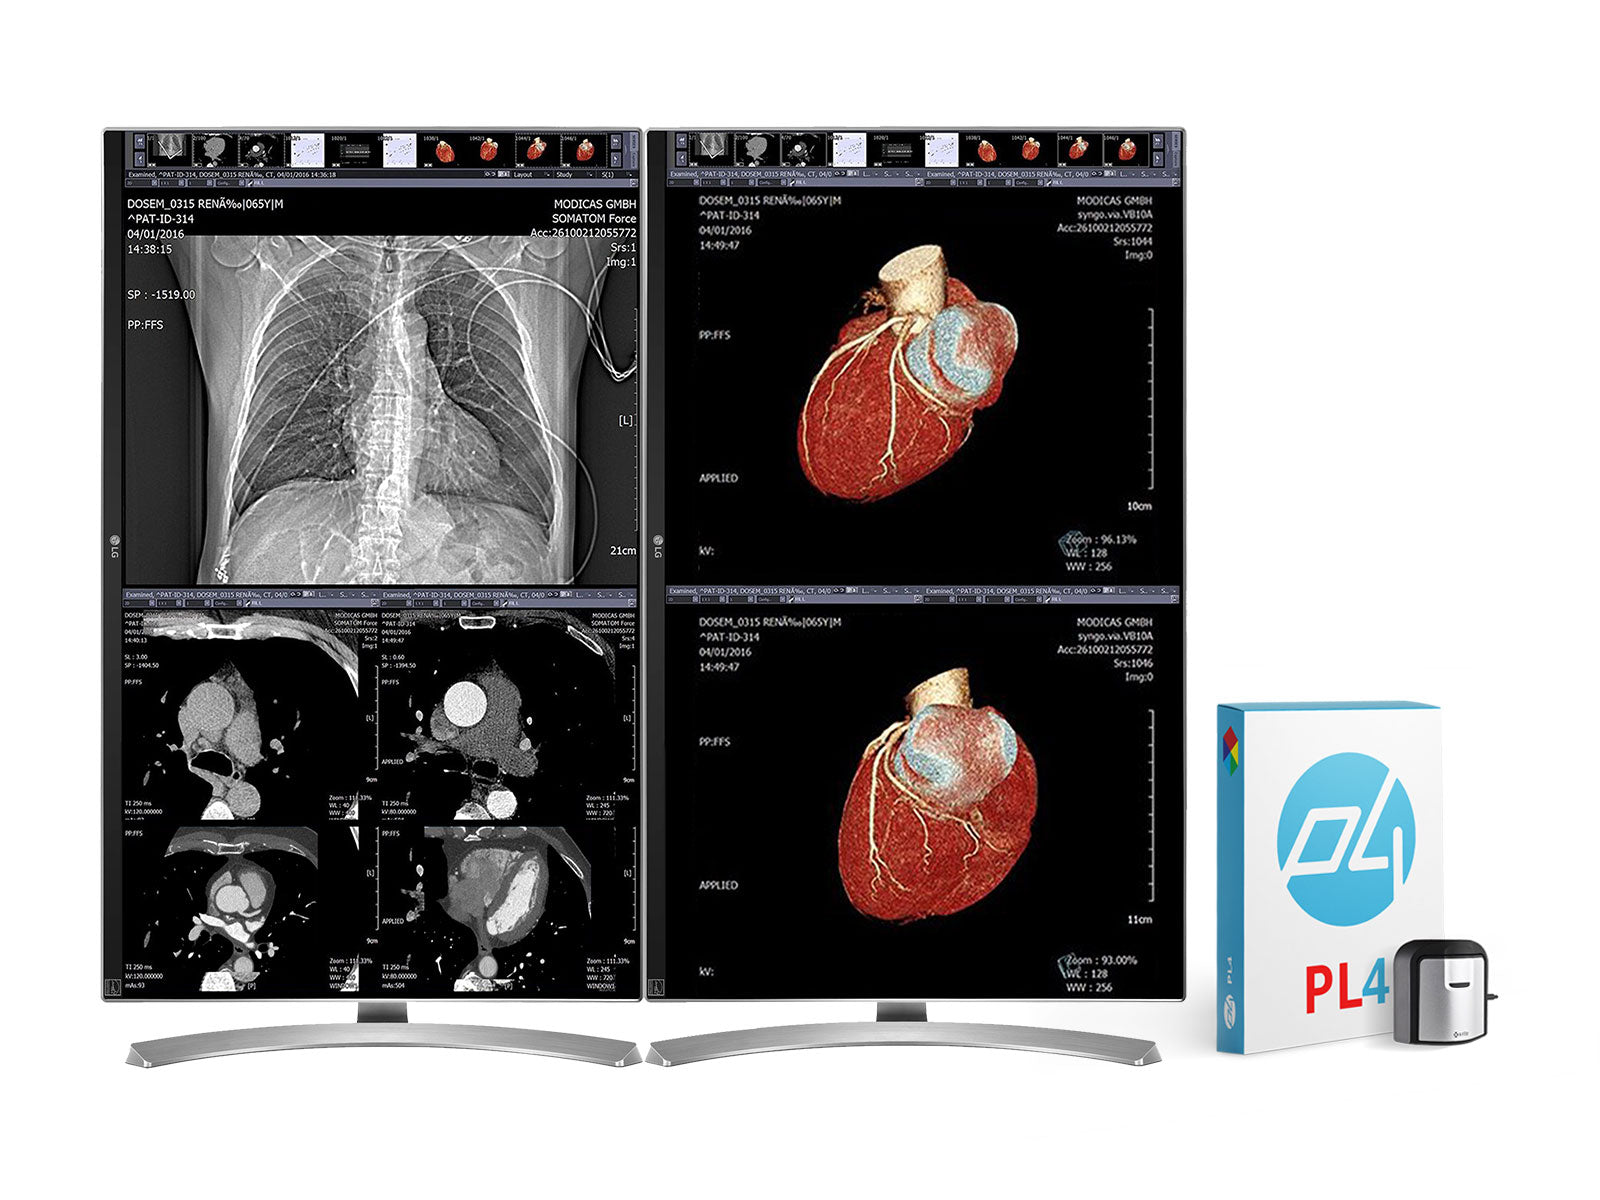 LG 27" 8MP Color Clinical Review Medical Display Monitor (27M-W)